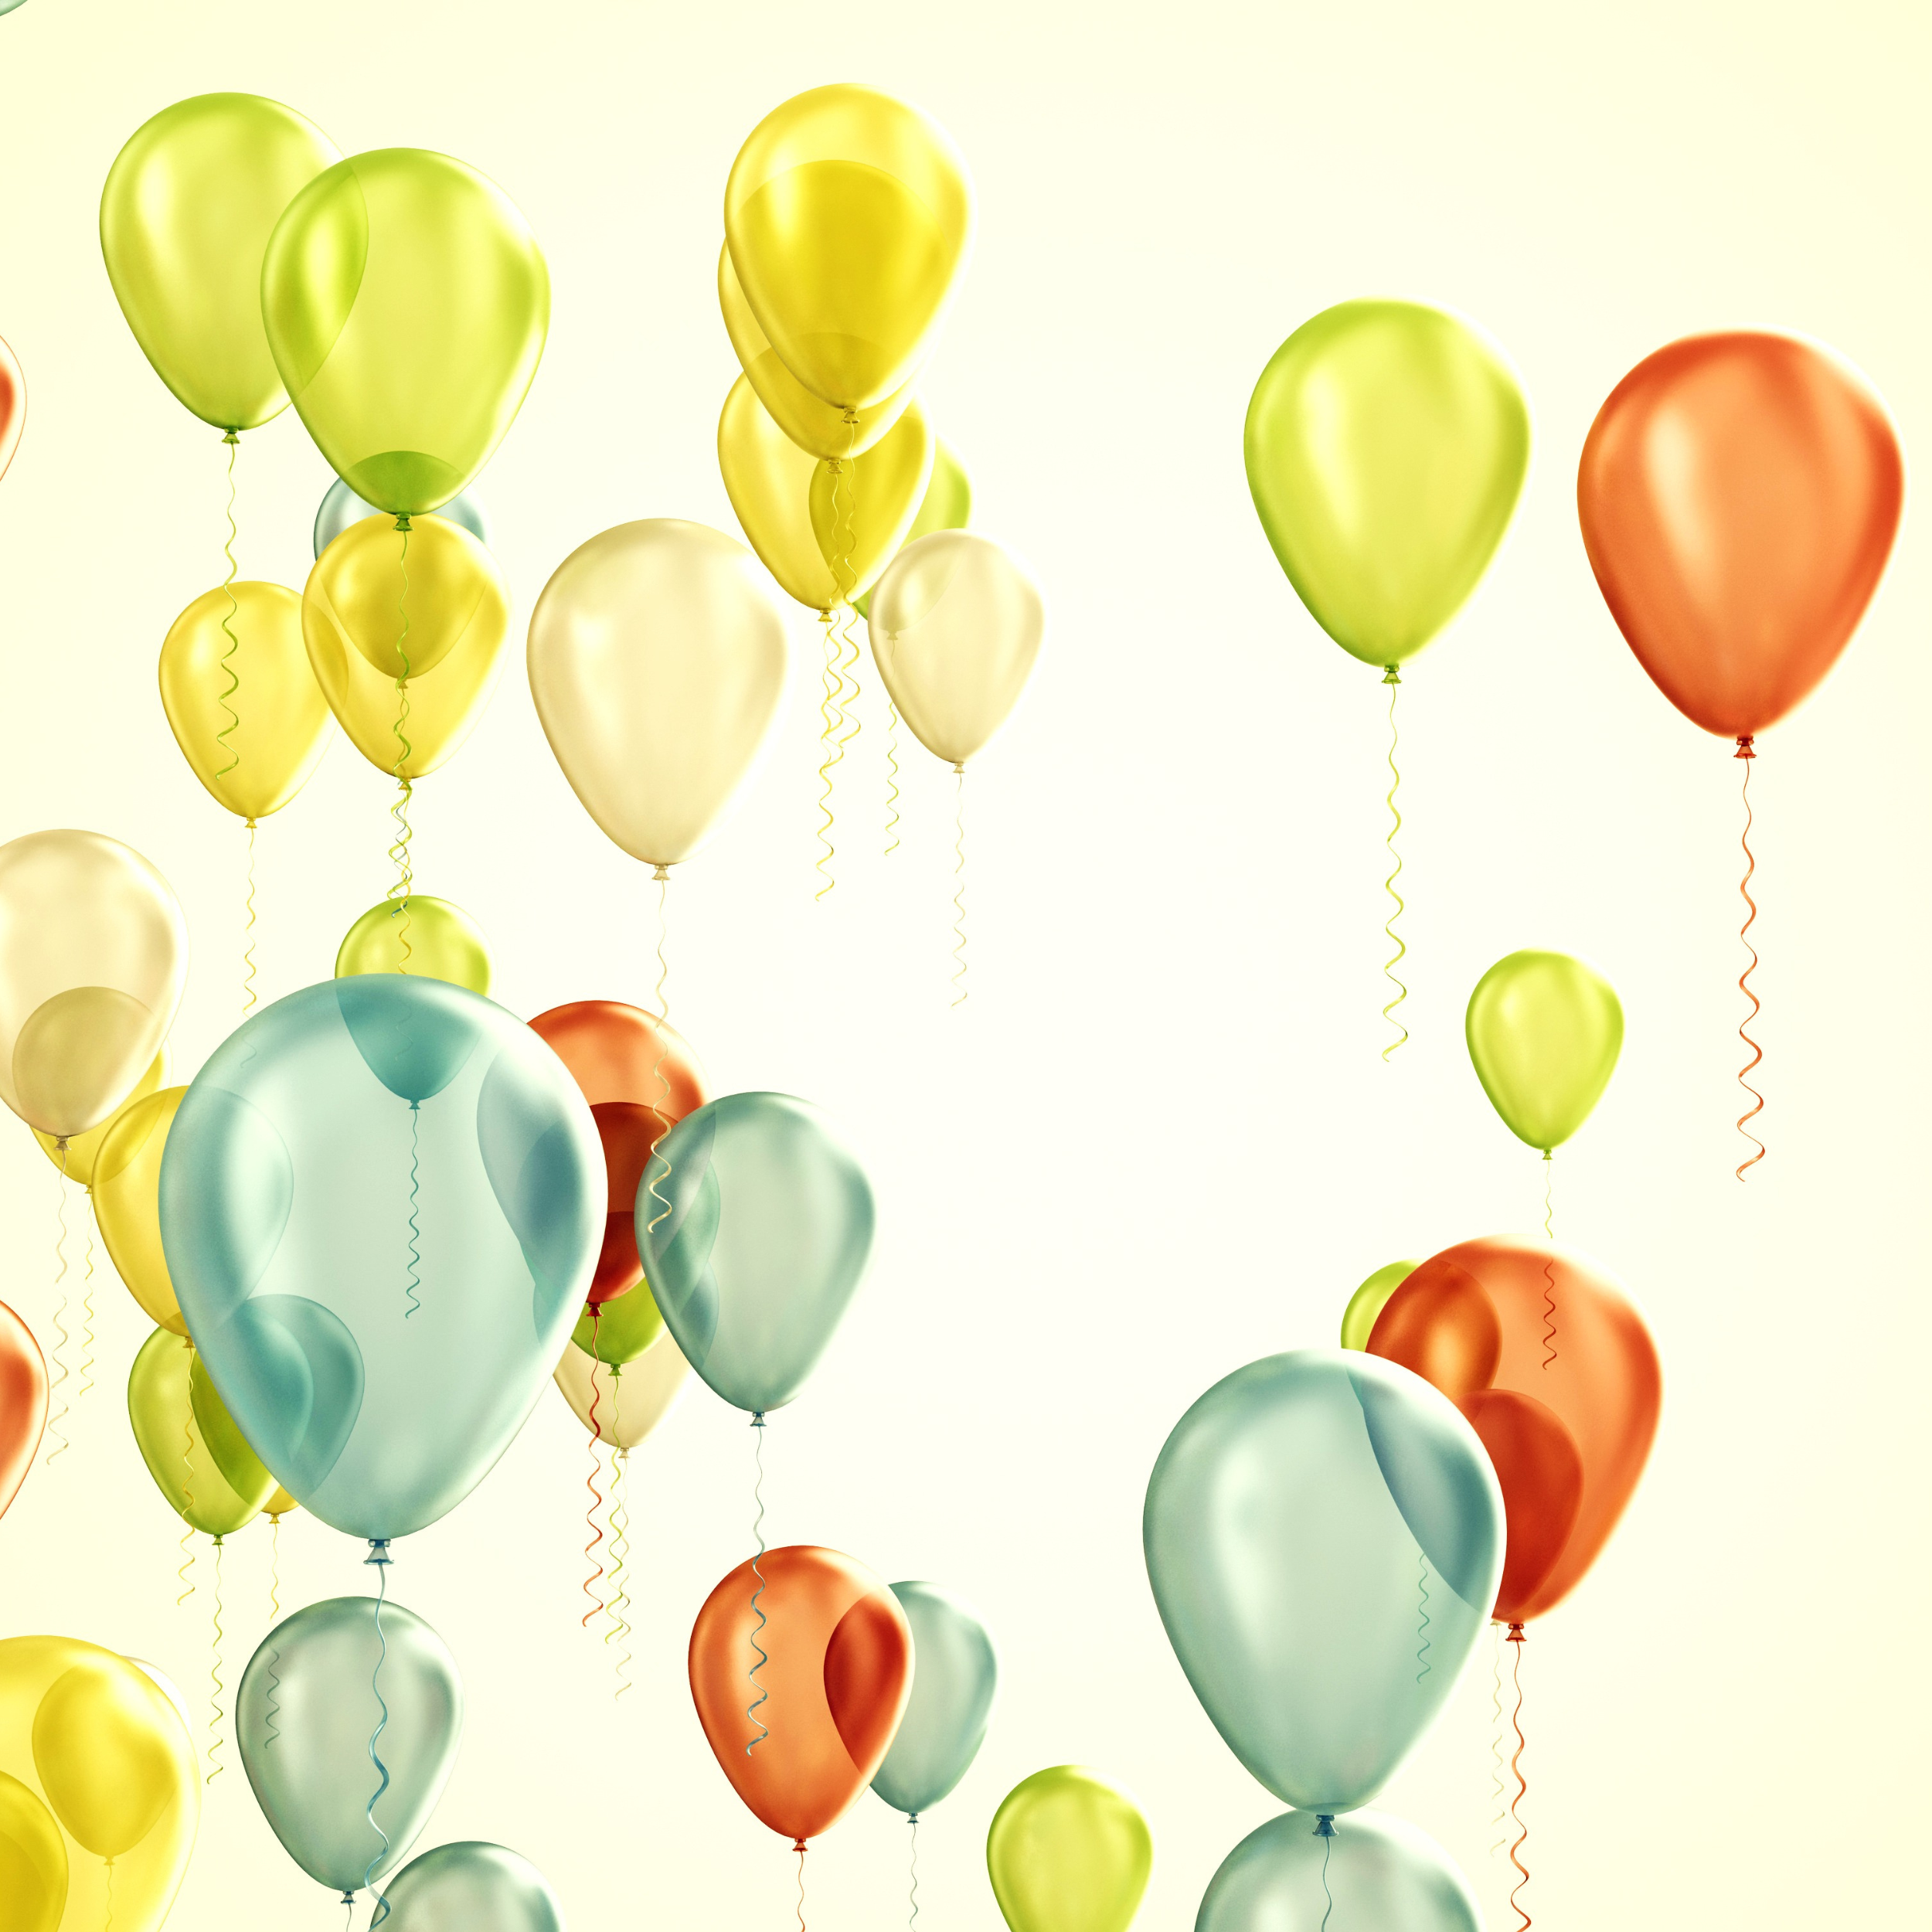 Several balloons that are lime green, turquoise, yellow, and orange